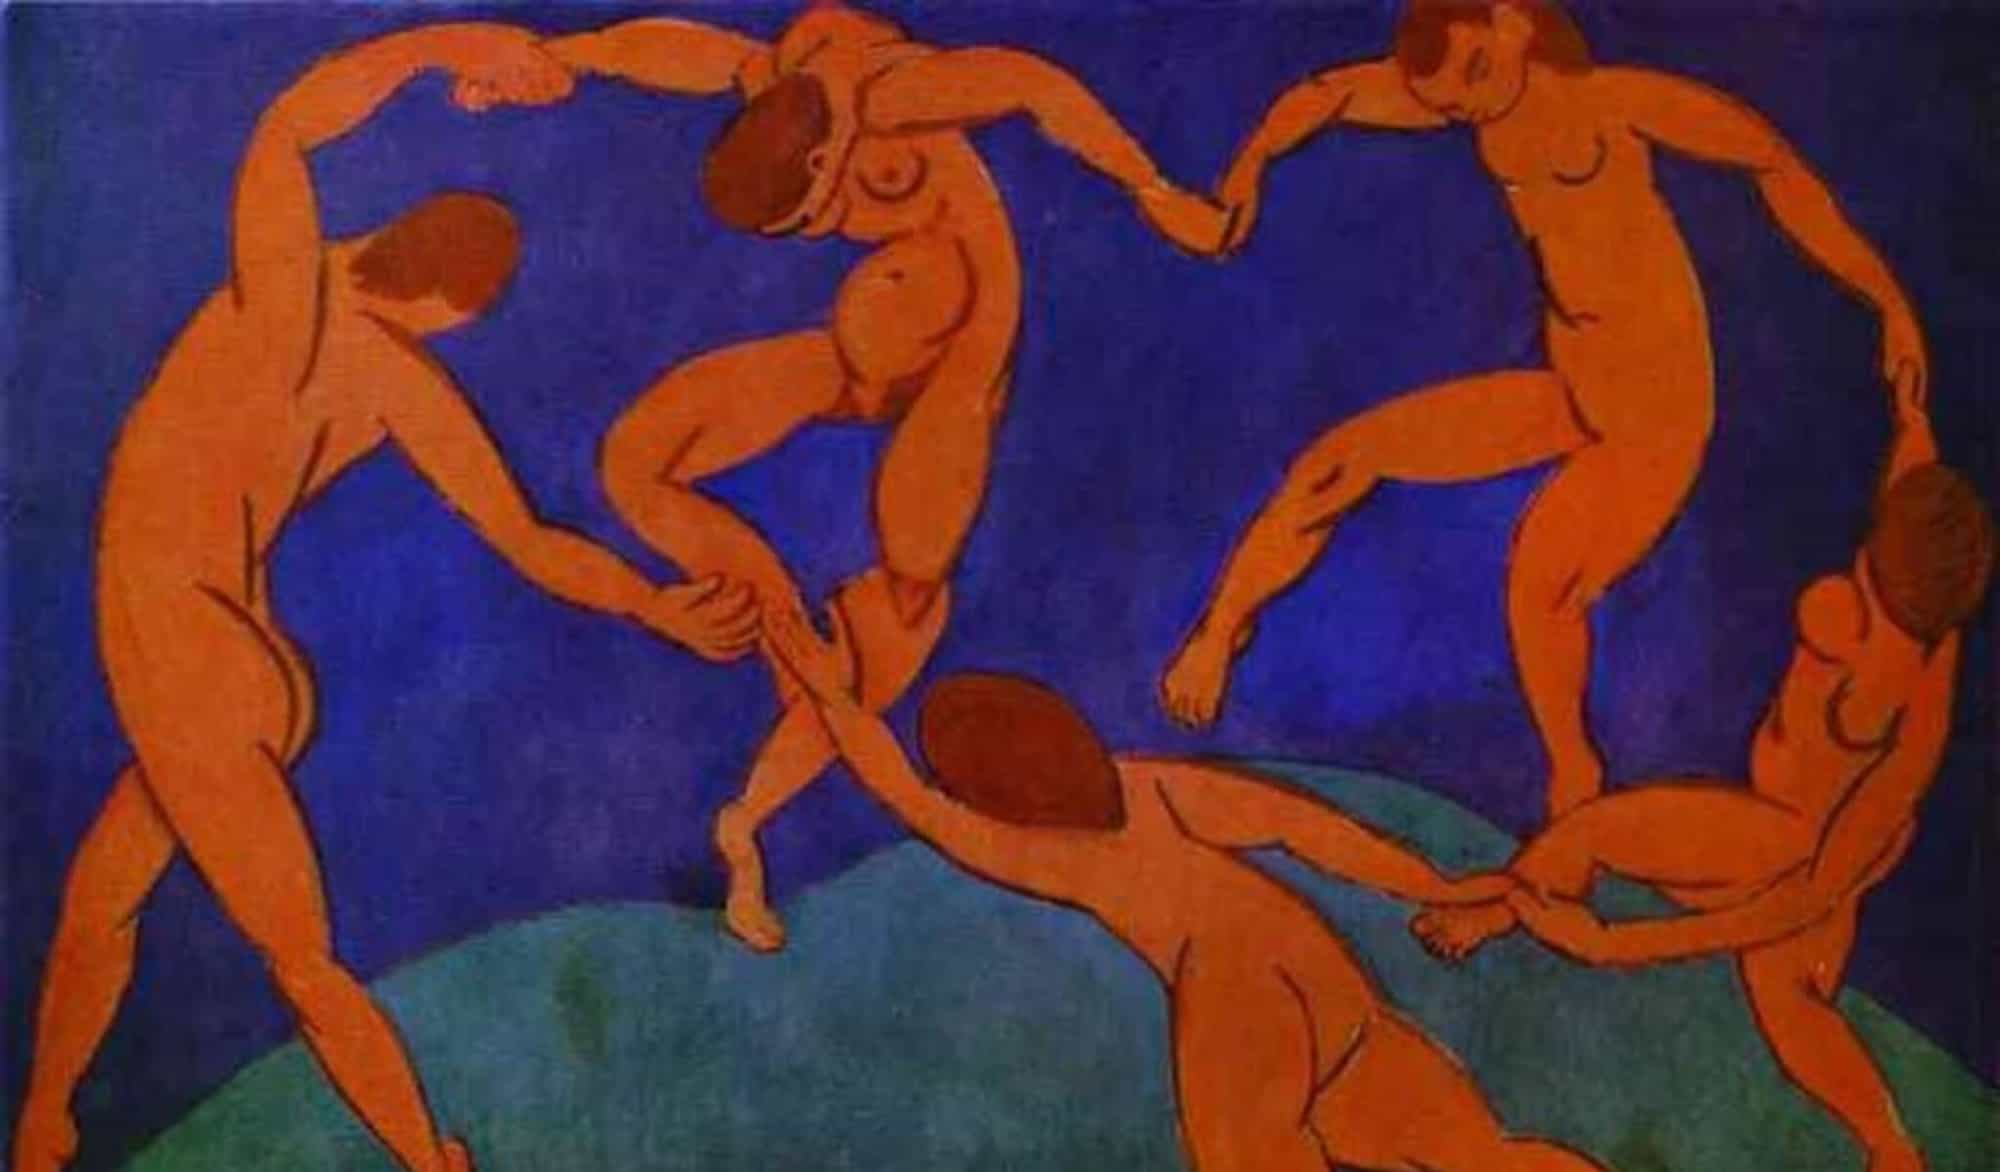 Henri Matisse's iconic dance painting in blue and orange.